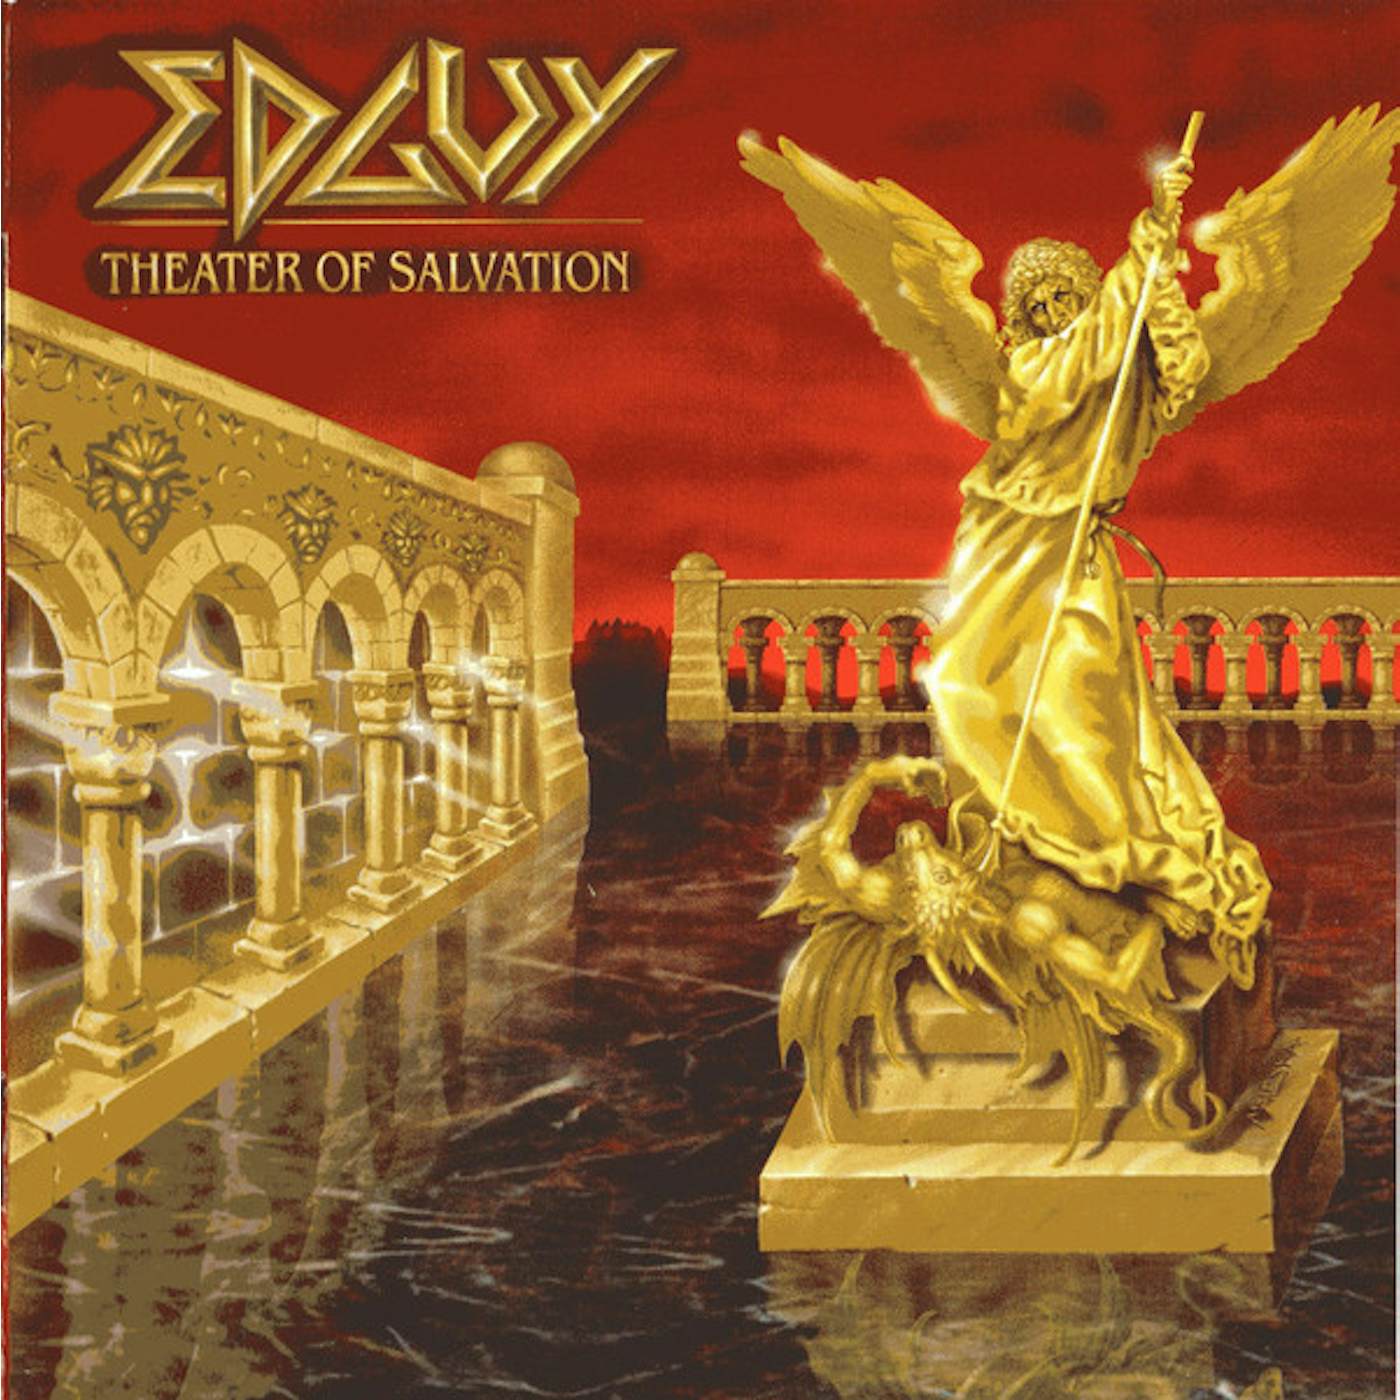 Edguy THEATER OF SALVATION (2CD) CD